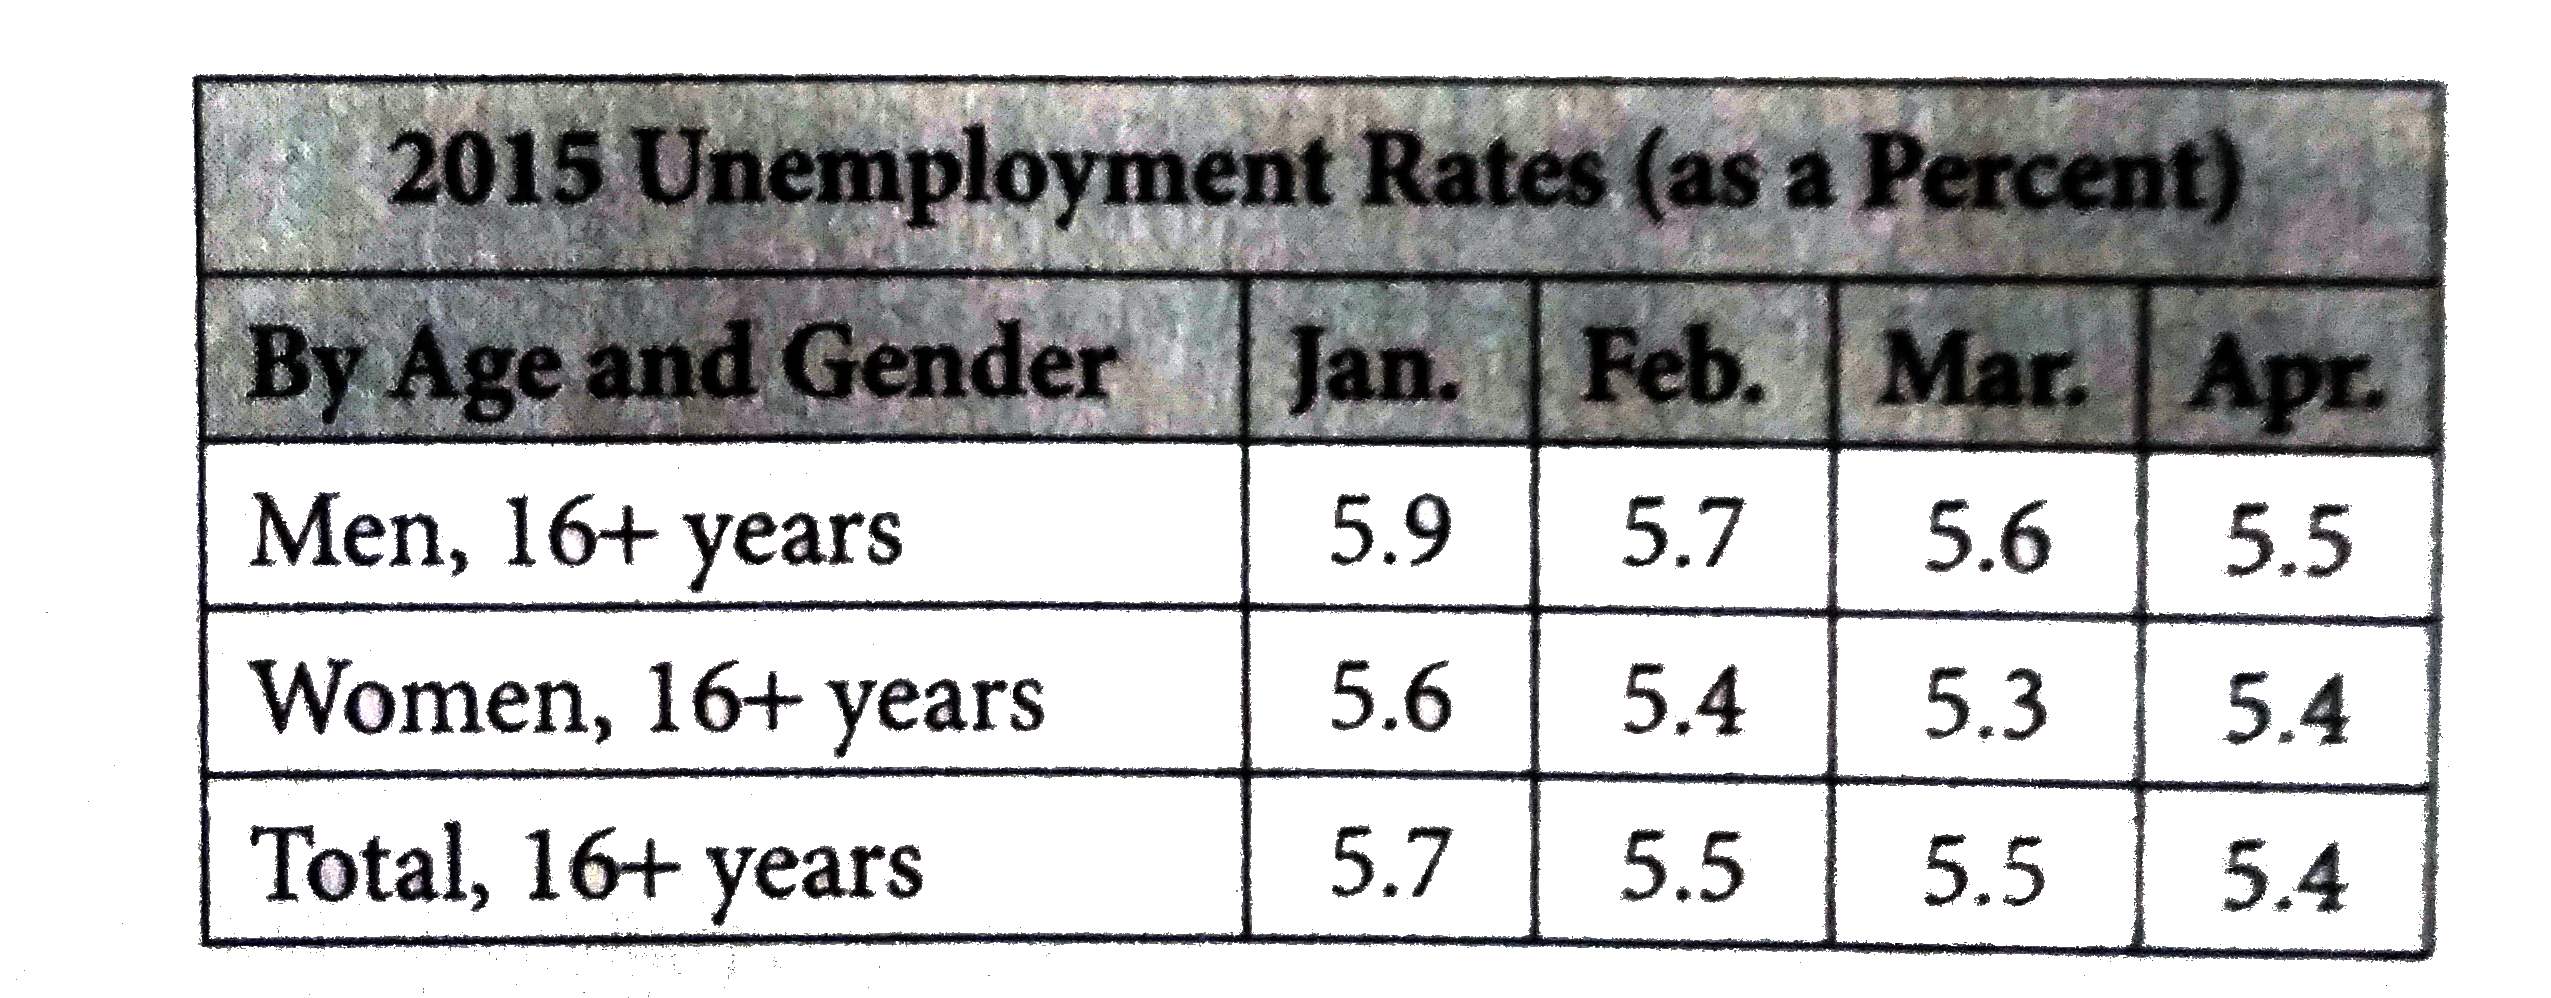 Unemployment rates in the U.S. for the  first four months of 2015 are given in the table above. These rates are based on prople, 16 years and order, that are considered to be part of the workforce. In a certain distinct, there are 12,800 people eligible to be part of the workforce, of work 53.5% are men. Based on the information in the table,  how many more men in this distrinct were unemployed than  women in April 2015 in this distinct?